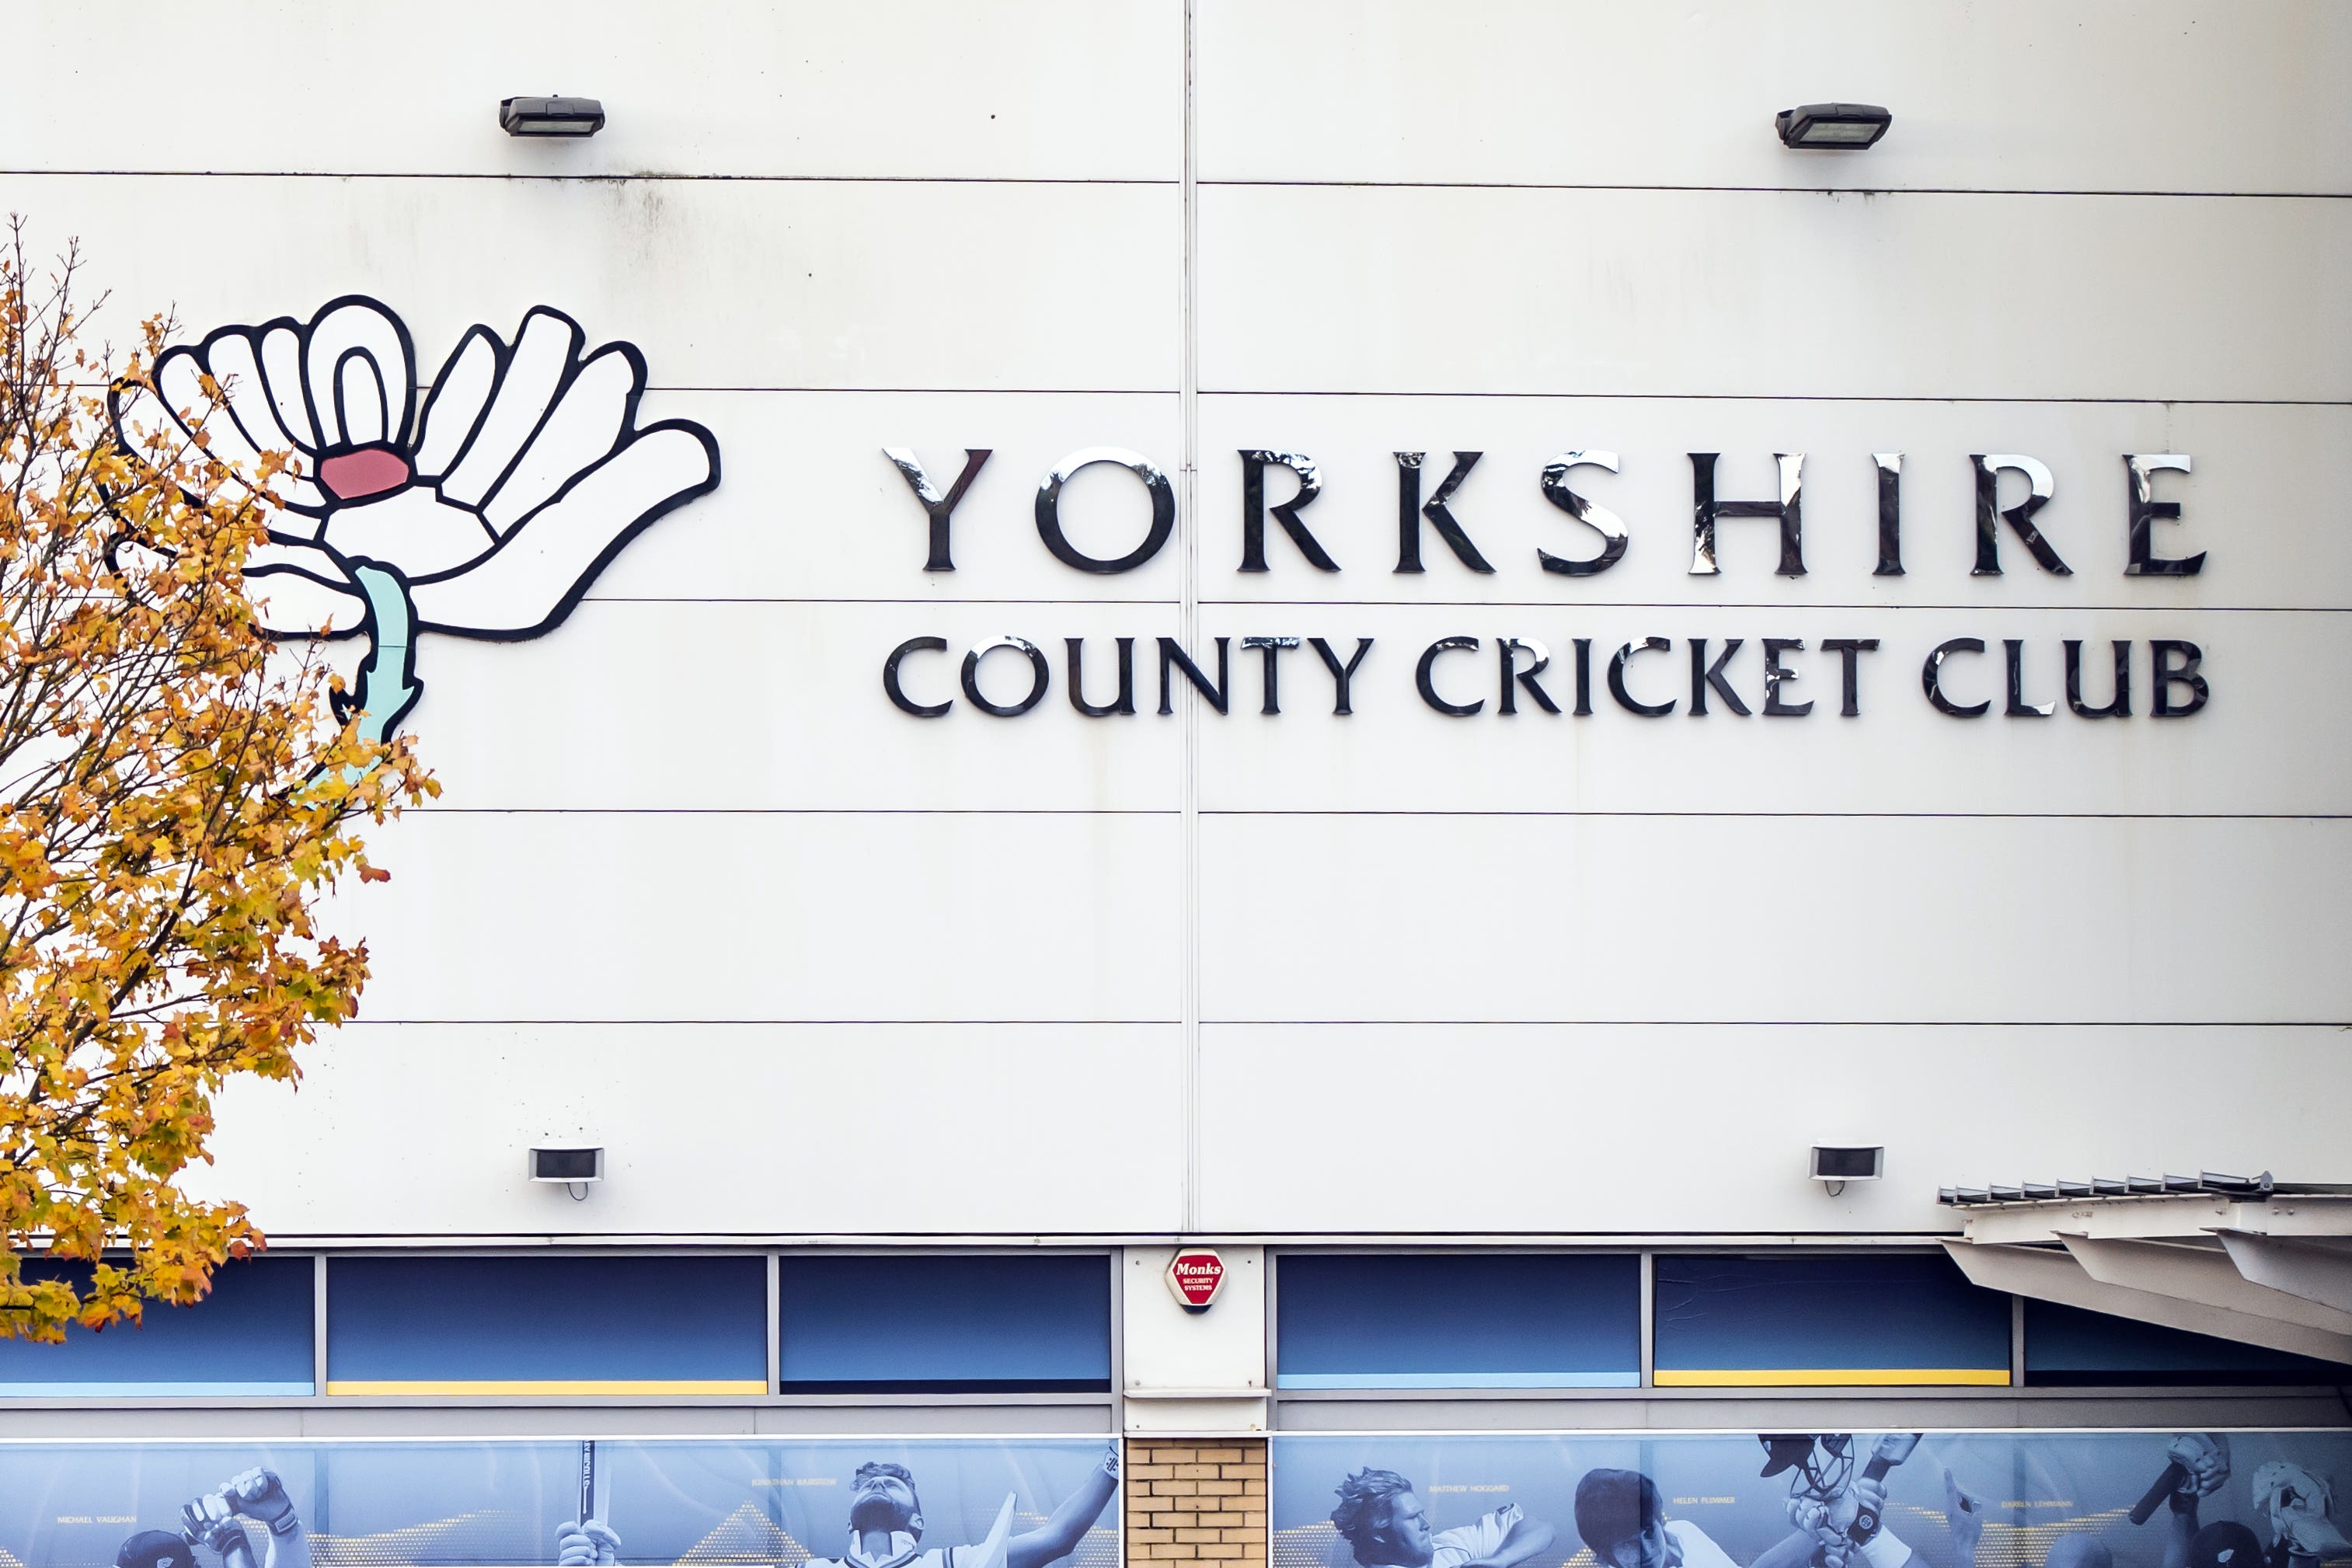 The Yorkshire racism scandal is rumbling on